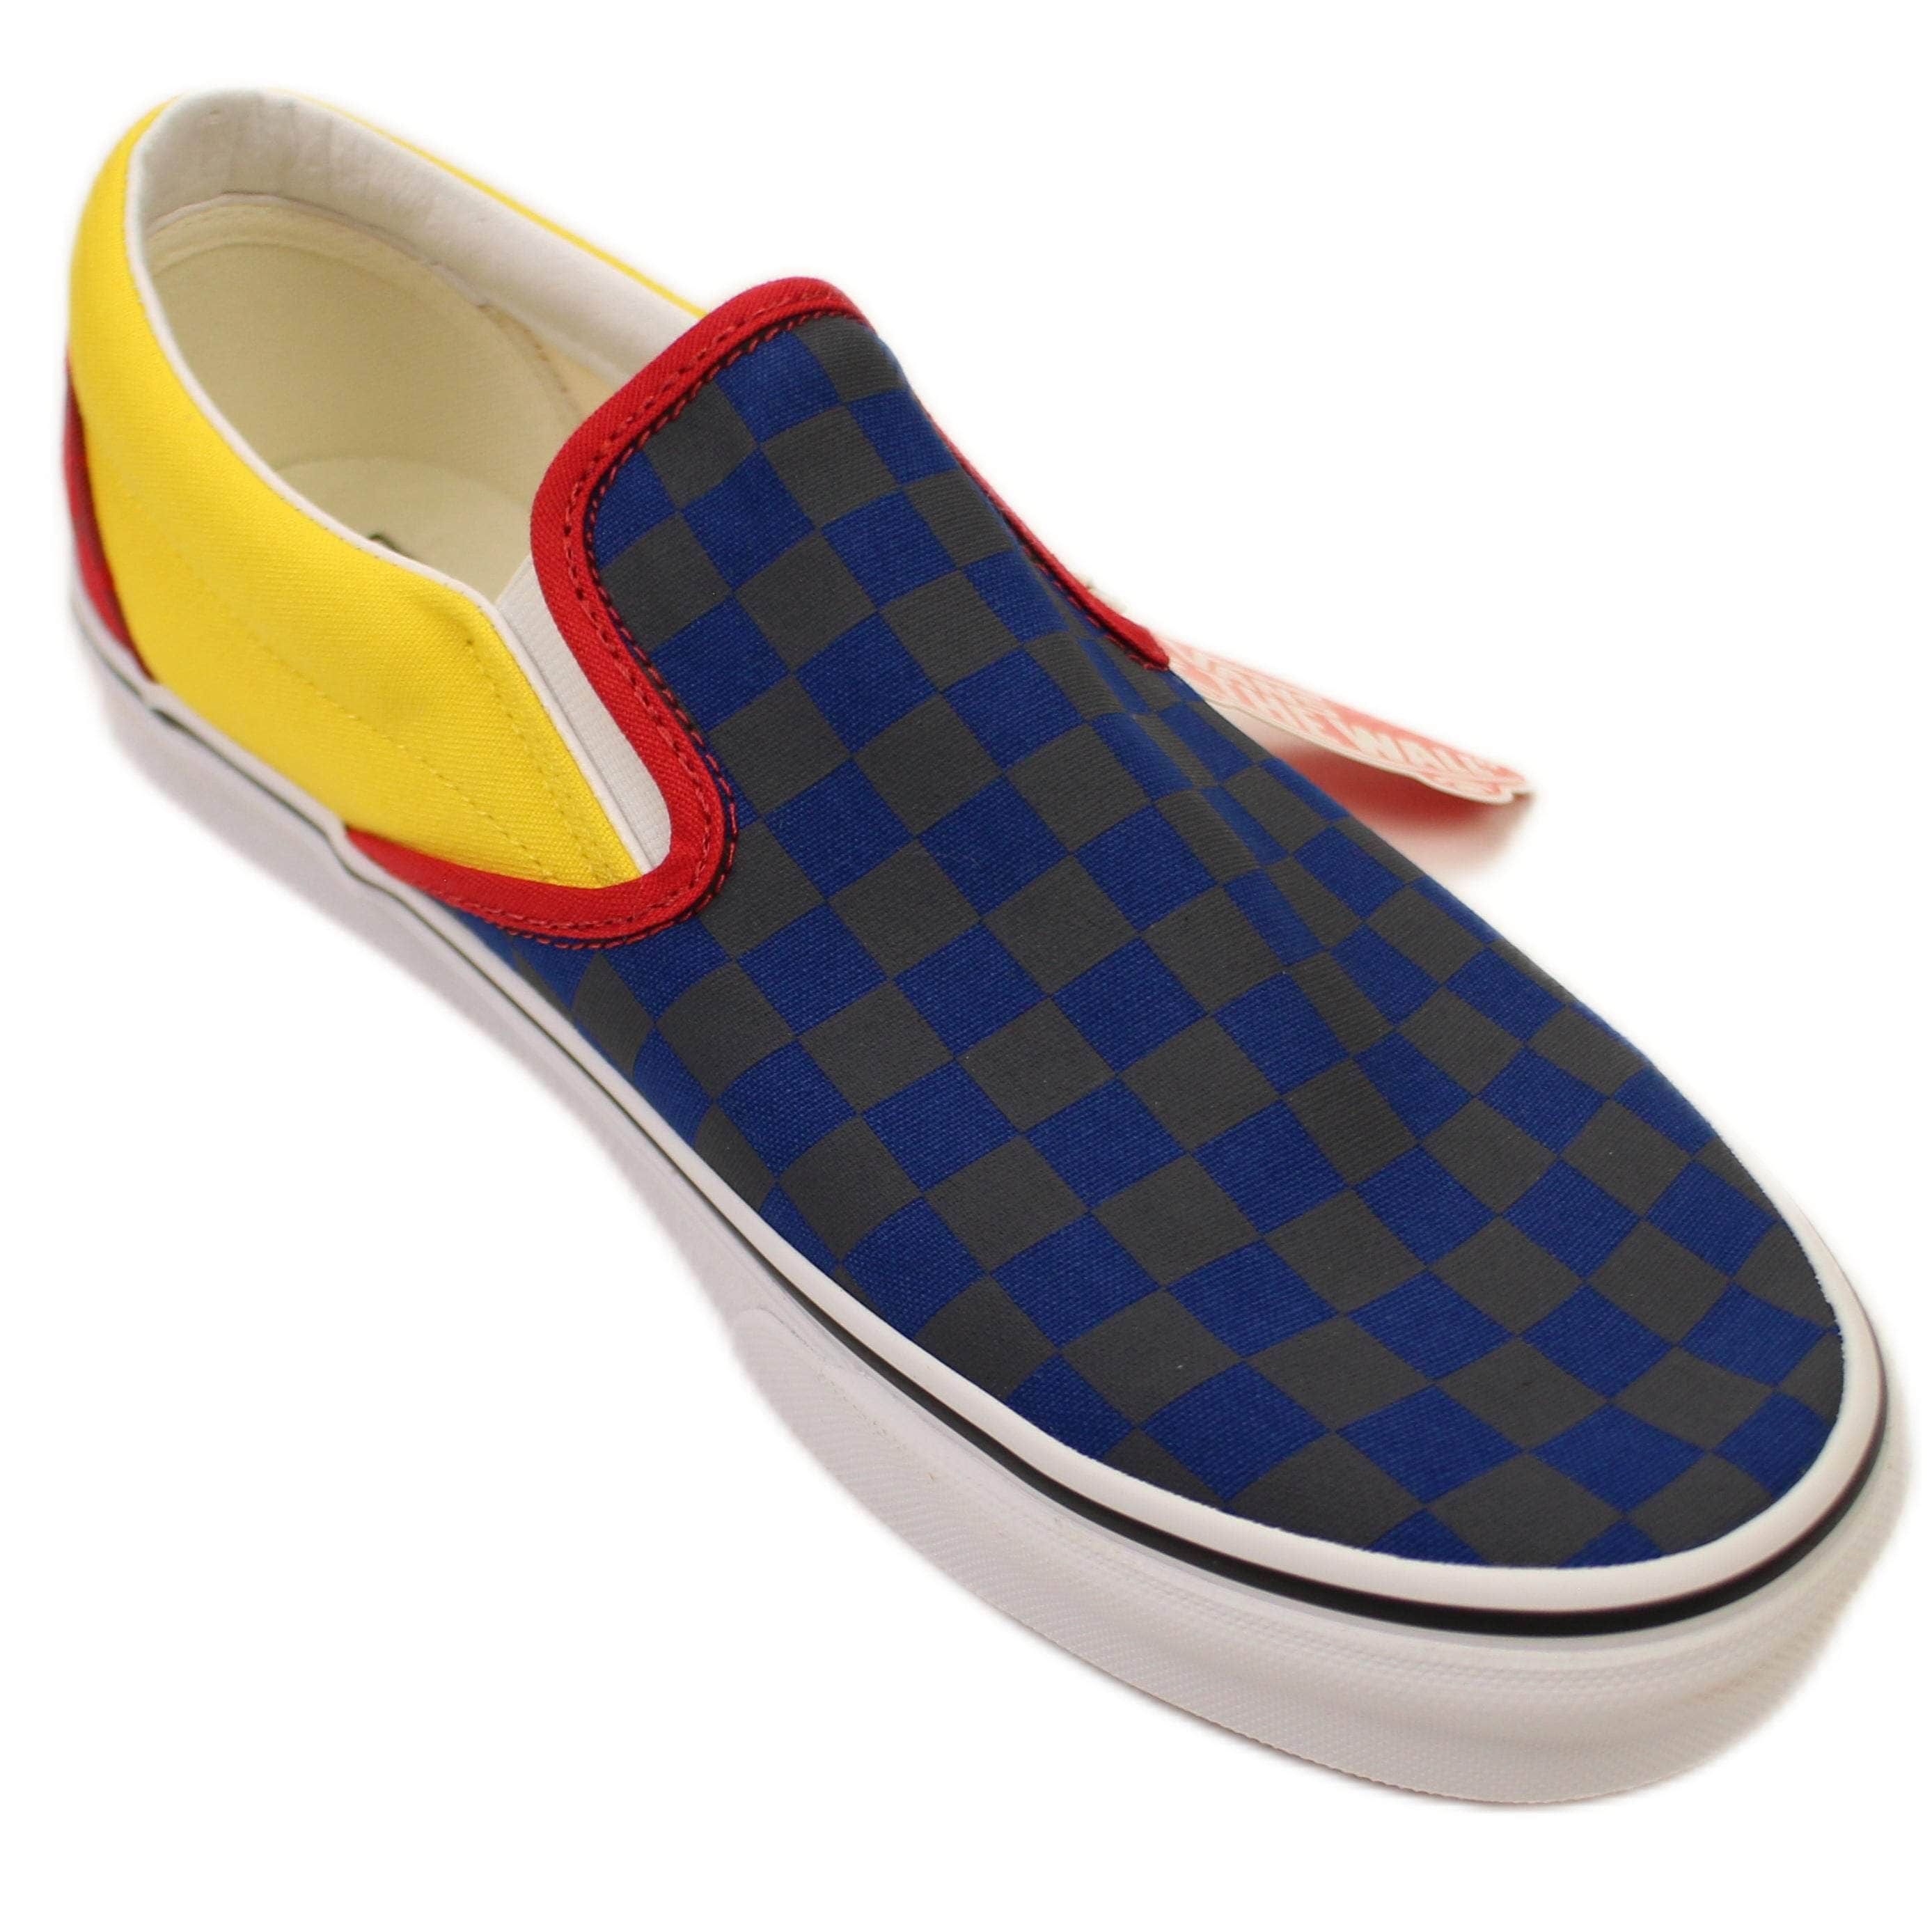 Vans channelenable-all, chicmi, couponcollection, main-shoes, shop375, size-11-5, under-250, unisex-sneakers 11.5 NAVY YELLOW U CLASSIC SLIP-ON SNEAKERS 95-VNS-2014/11.5 95-VNS-2014/11.5